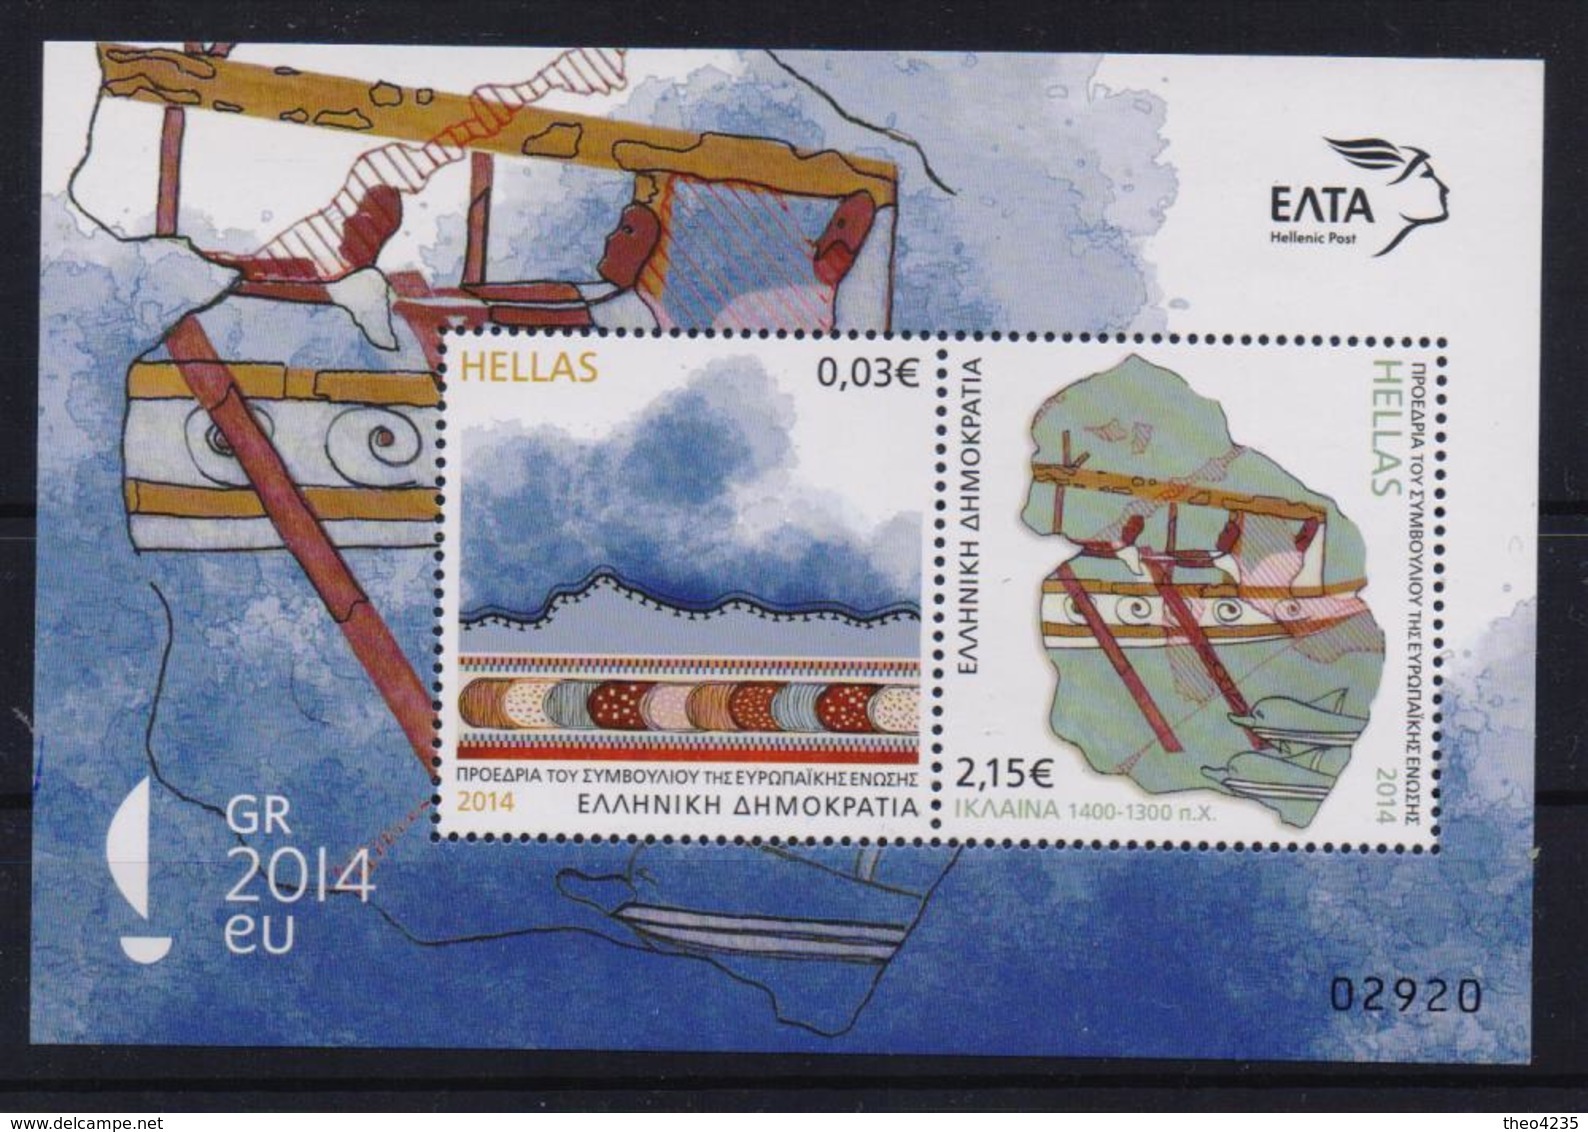 GREECE STAMPS 2014/ GREEK PRESIDENCY OF THE COUNCIL OF E.U M/S-15/1/14-PART OF THE SET - Neufs